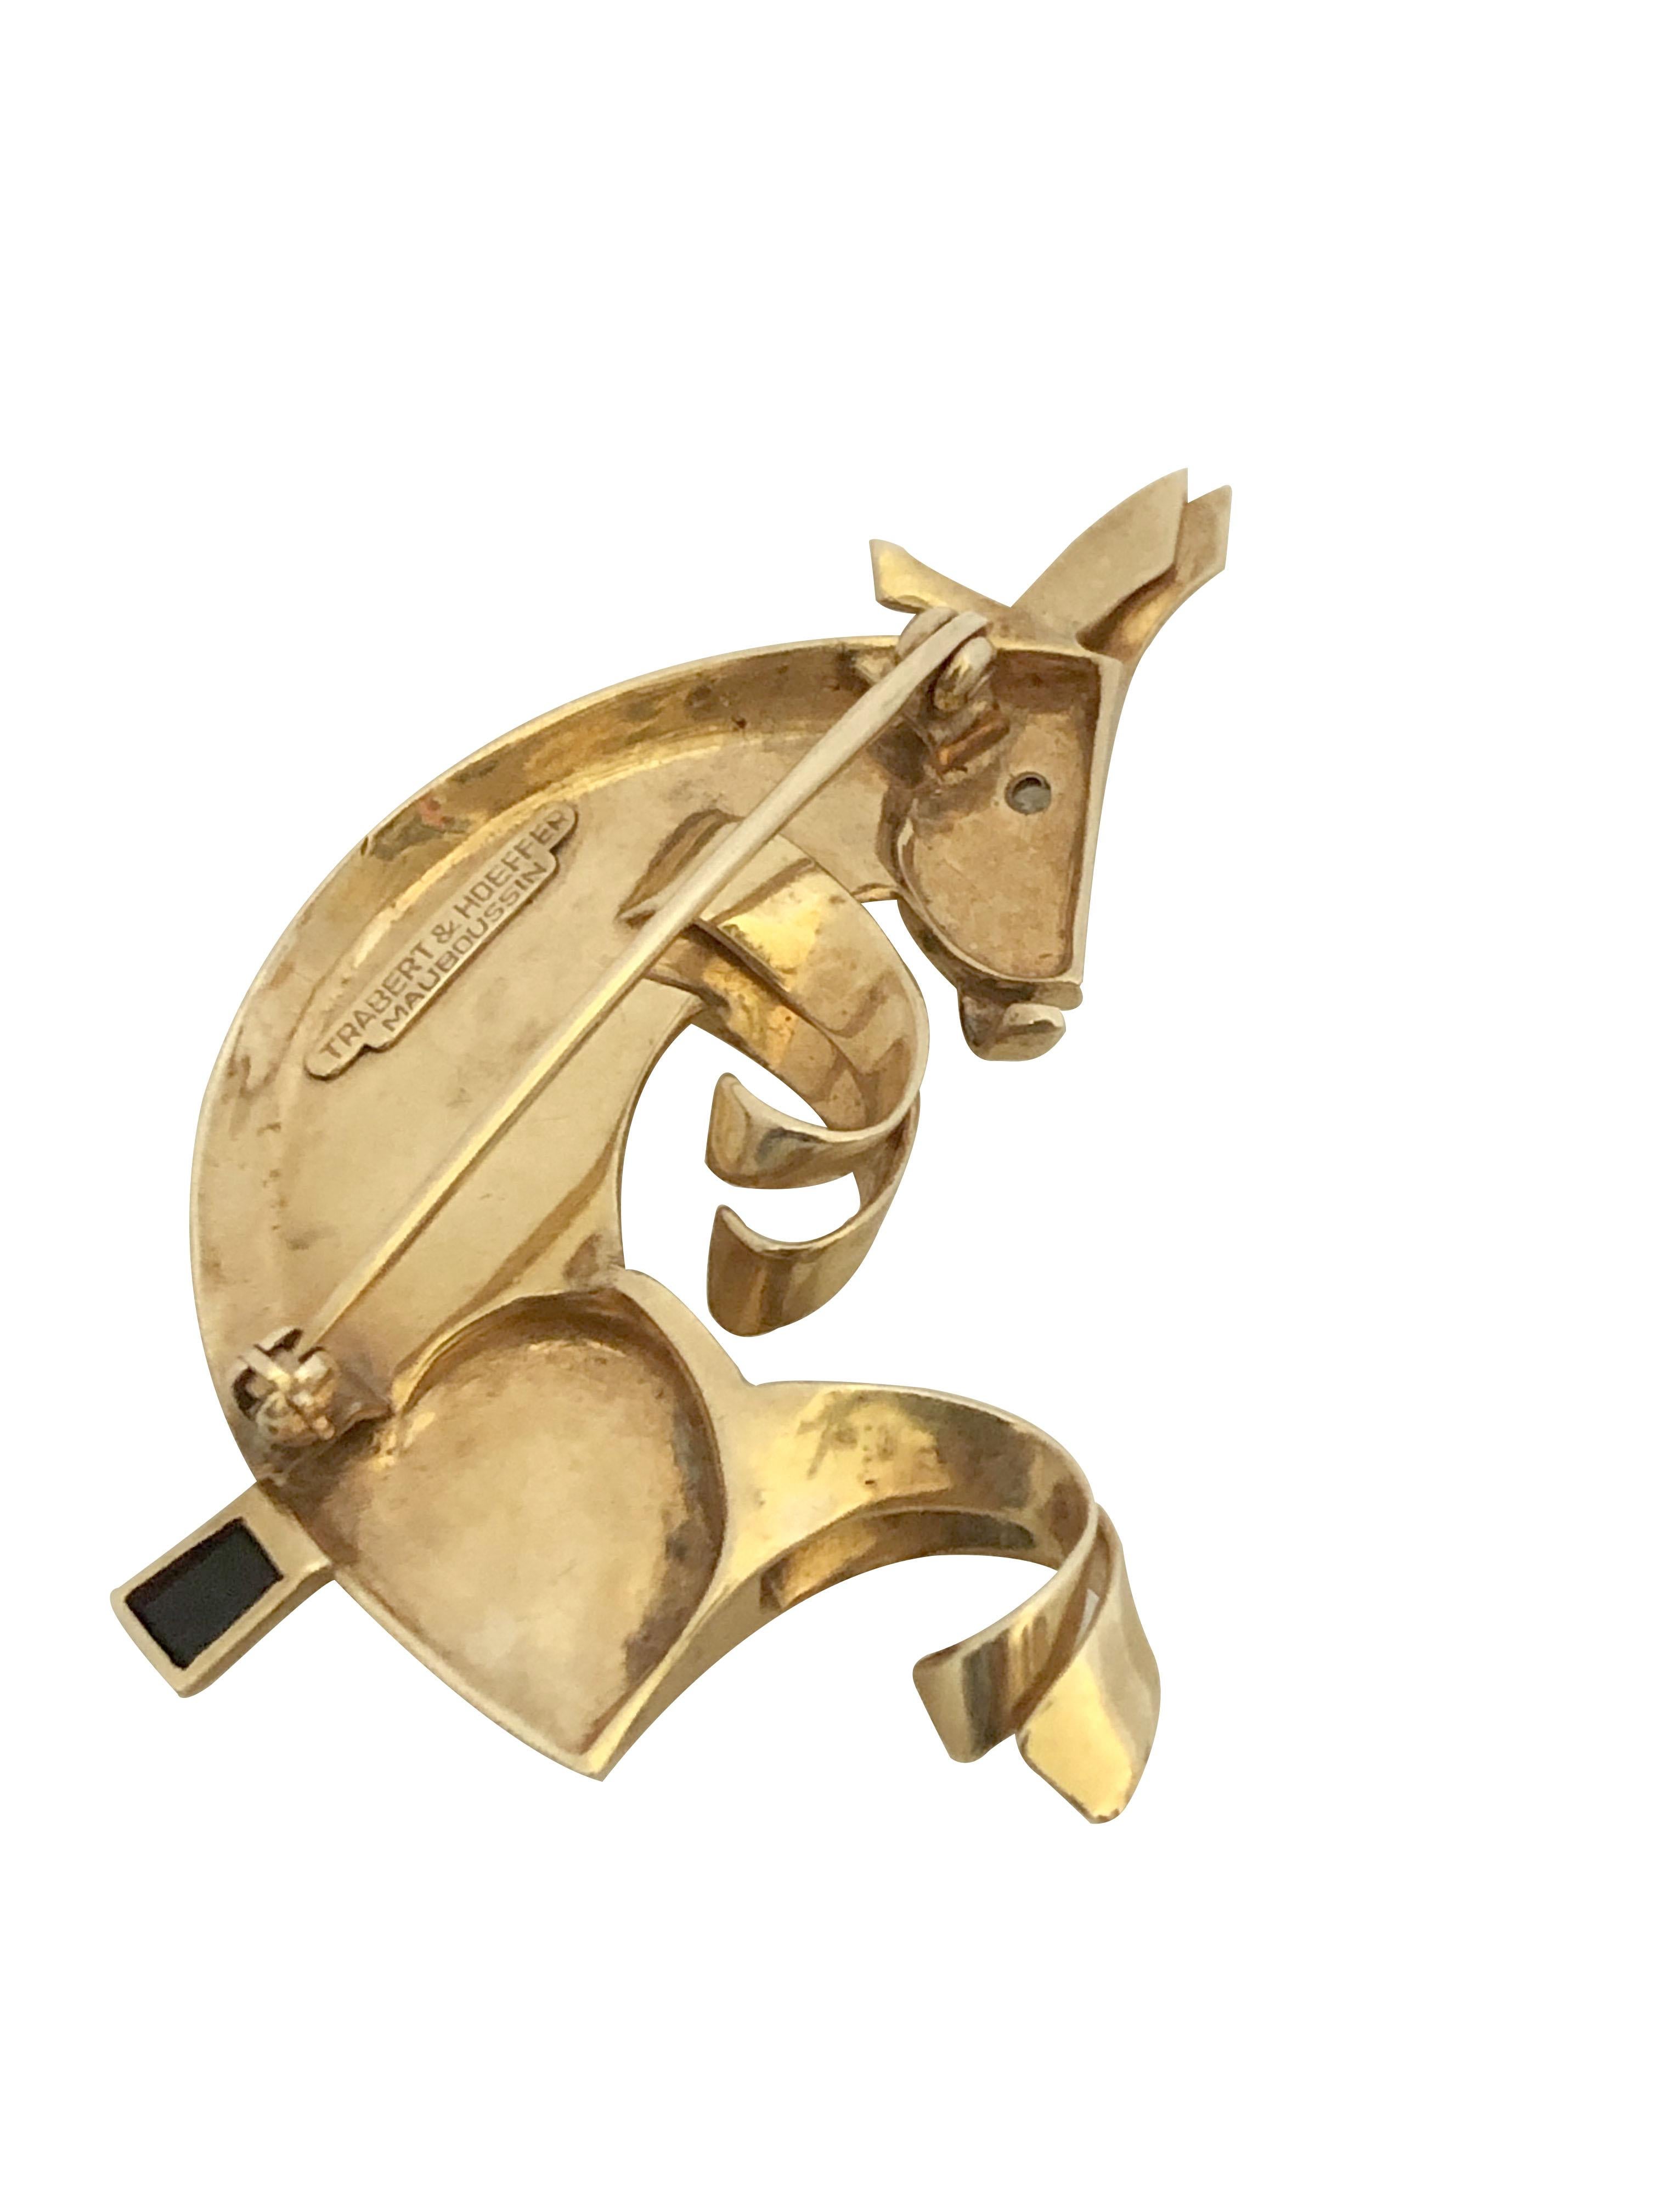 Circa 1940s Mauboussin for Trabert & Hoeffer Very Whimsical and Retro Stylized 14K yellow Gold Donkey Brooch, measuring 2 inches in length X 1 1/2 inches. Having a Diamond Eye and a faceted Onyx Tail. 